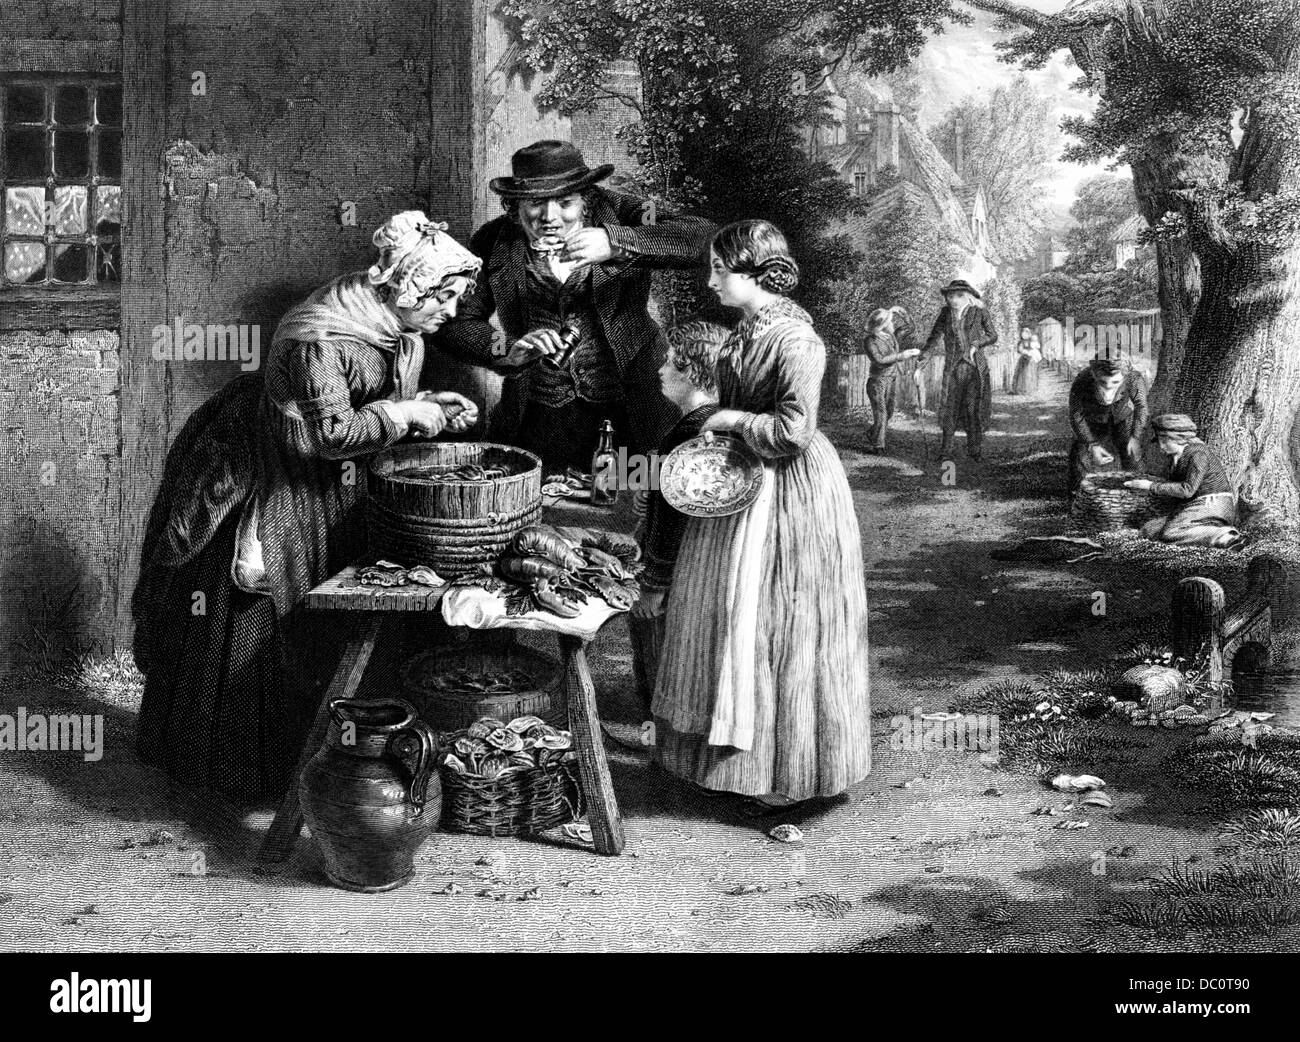 1800s FIRST DAY OF OYSTERS AT OPEN AIR FISH MONGER'S STAND WOMAN SHUCKING OYSTERS FOR CUSTOMERS BY GREATBATCH Stock Photo